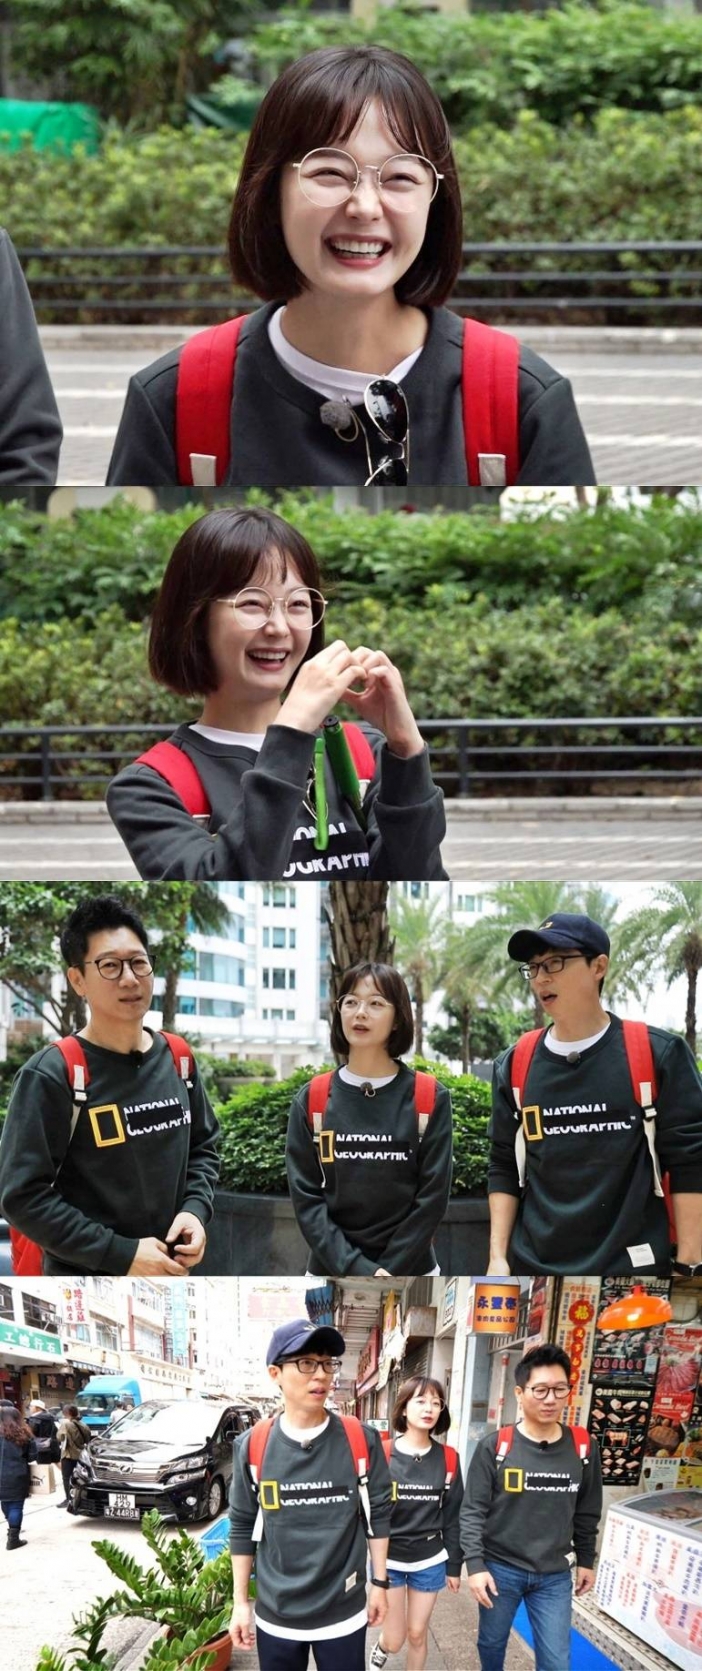 Actor Jeon So-min reveals his heart for marriageOn SBS Running Man, which will be broadcast on the 16th, it will be decorated with the second mission year-end settlement race, which collects all of the global failure missions and re-enters the challenge.Earlier, they hoped to succeed in Hong Kongs various food, but after Okinawa cotton hell, they fell into Hong Kong cotton hell and gave a big smile. Jeon So-min found Newlyweds who took a wedding shoot during the mission.Jeon So-min looked at Newlyweds who had no intention of wedding photography with a happy expression and suddenly shouted I want to marriage and embarrassed Ji Suk-jin and Yoo Jae-Suk.Jeon So-min said, I wished to be lucky because I could not marriage in Running Man.I do not think I can marriage. On the other hand, Running Man is broadcast every Sunday at 4:50 pm.